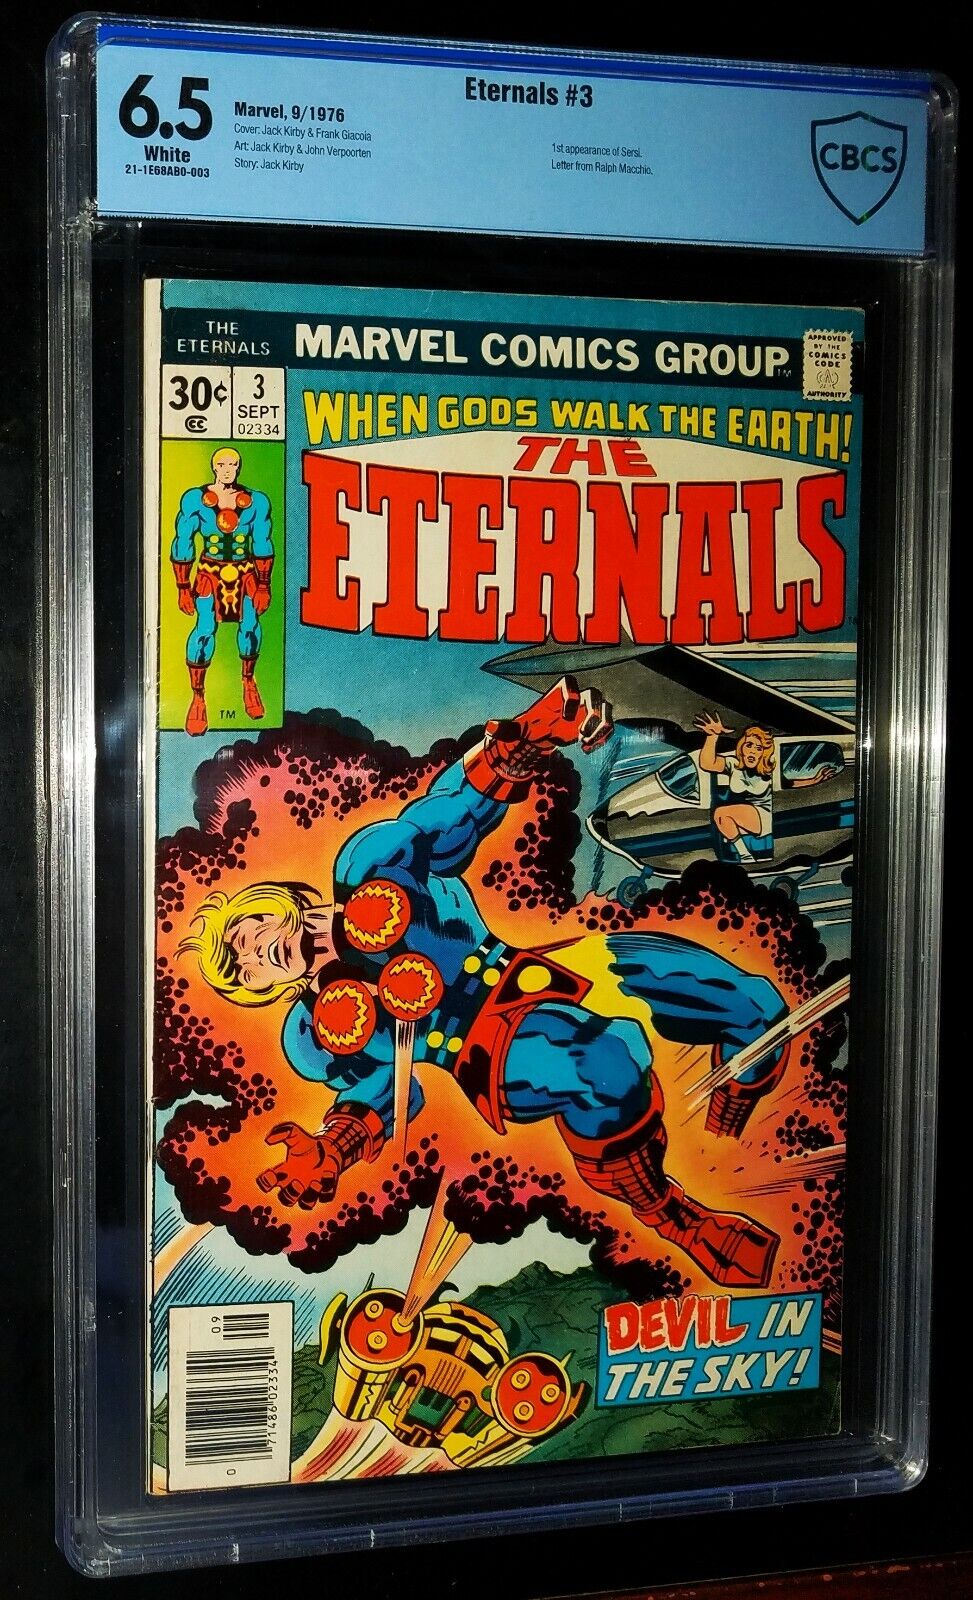 THE ETERNALS CBCS #3 1976 Marvel Comics CBCS 6.5 FN+ White Pages KEY ISSUE 0626